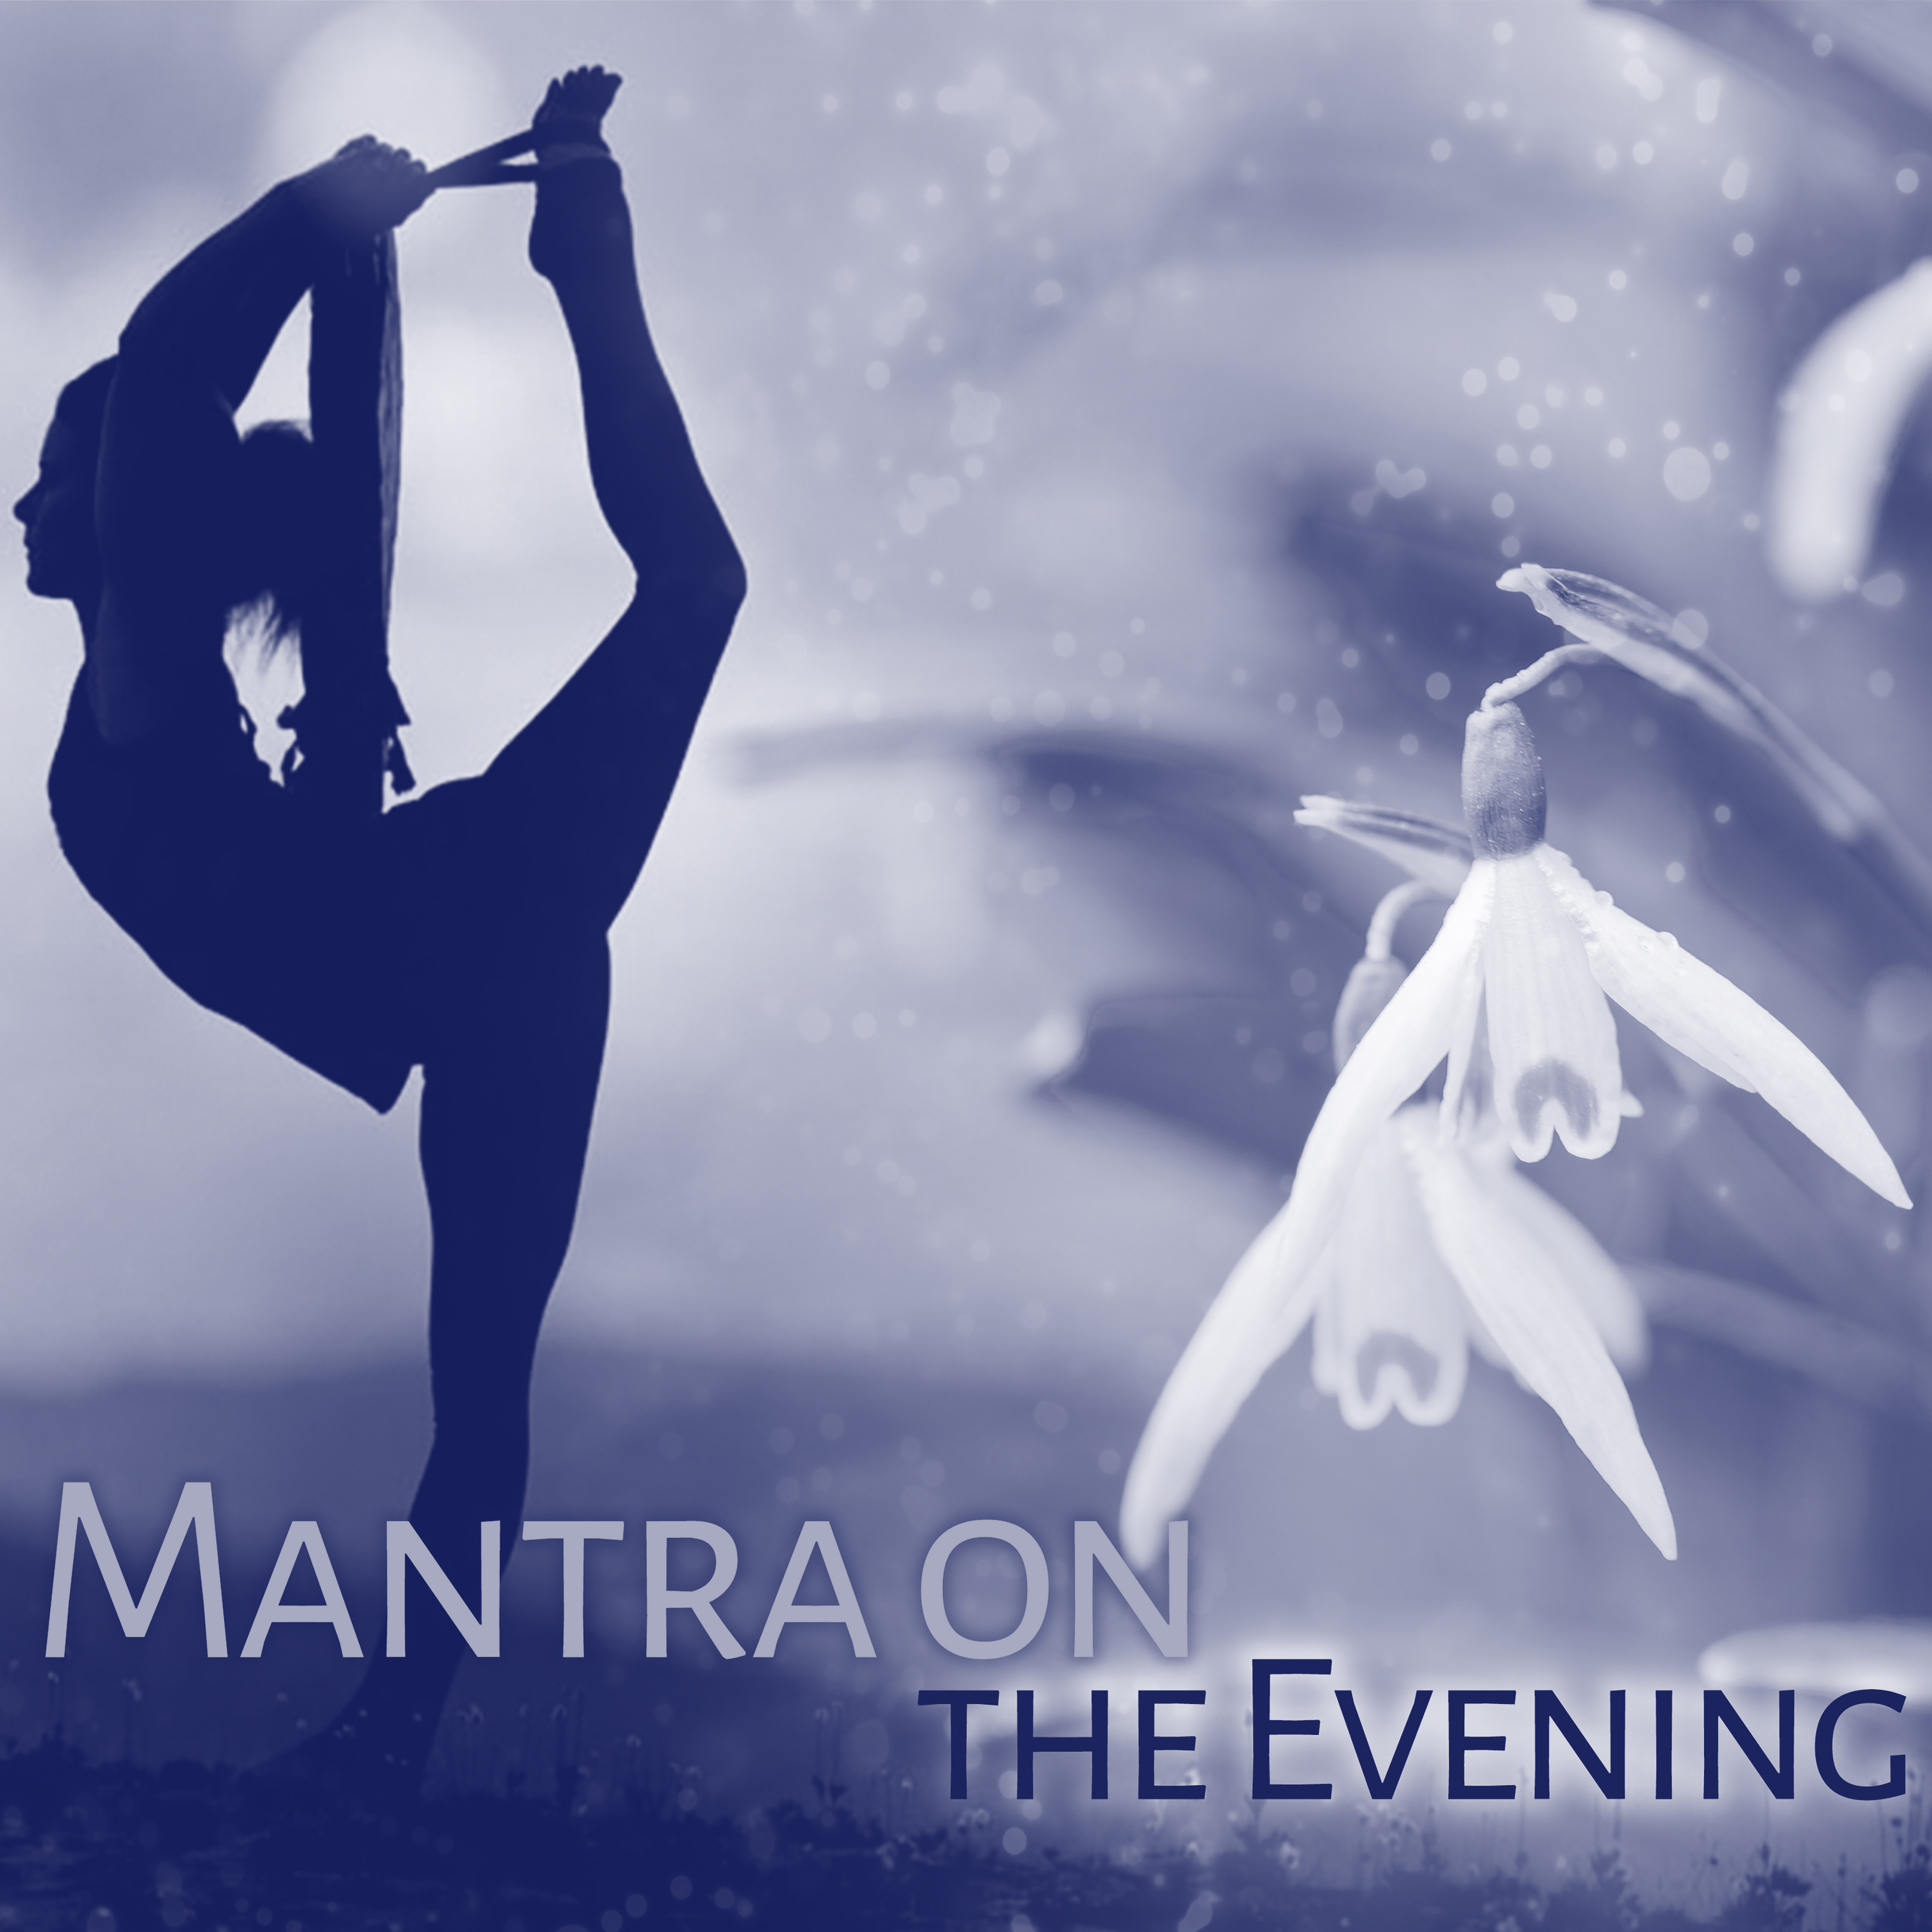 Mantra on the Evening  Spiritual Sounds of Nature for Mantra, Yoga, Meditate, Relax, Sleep